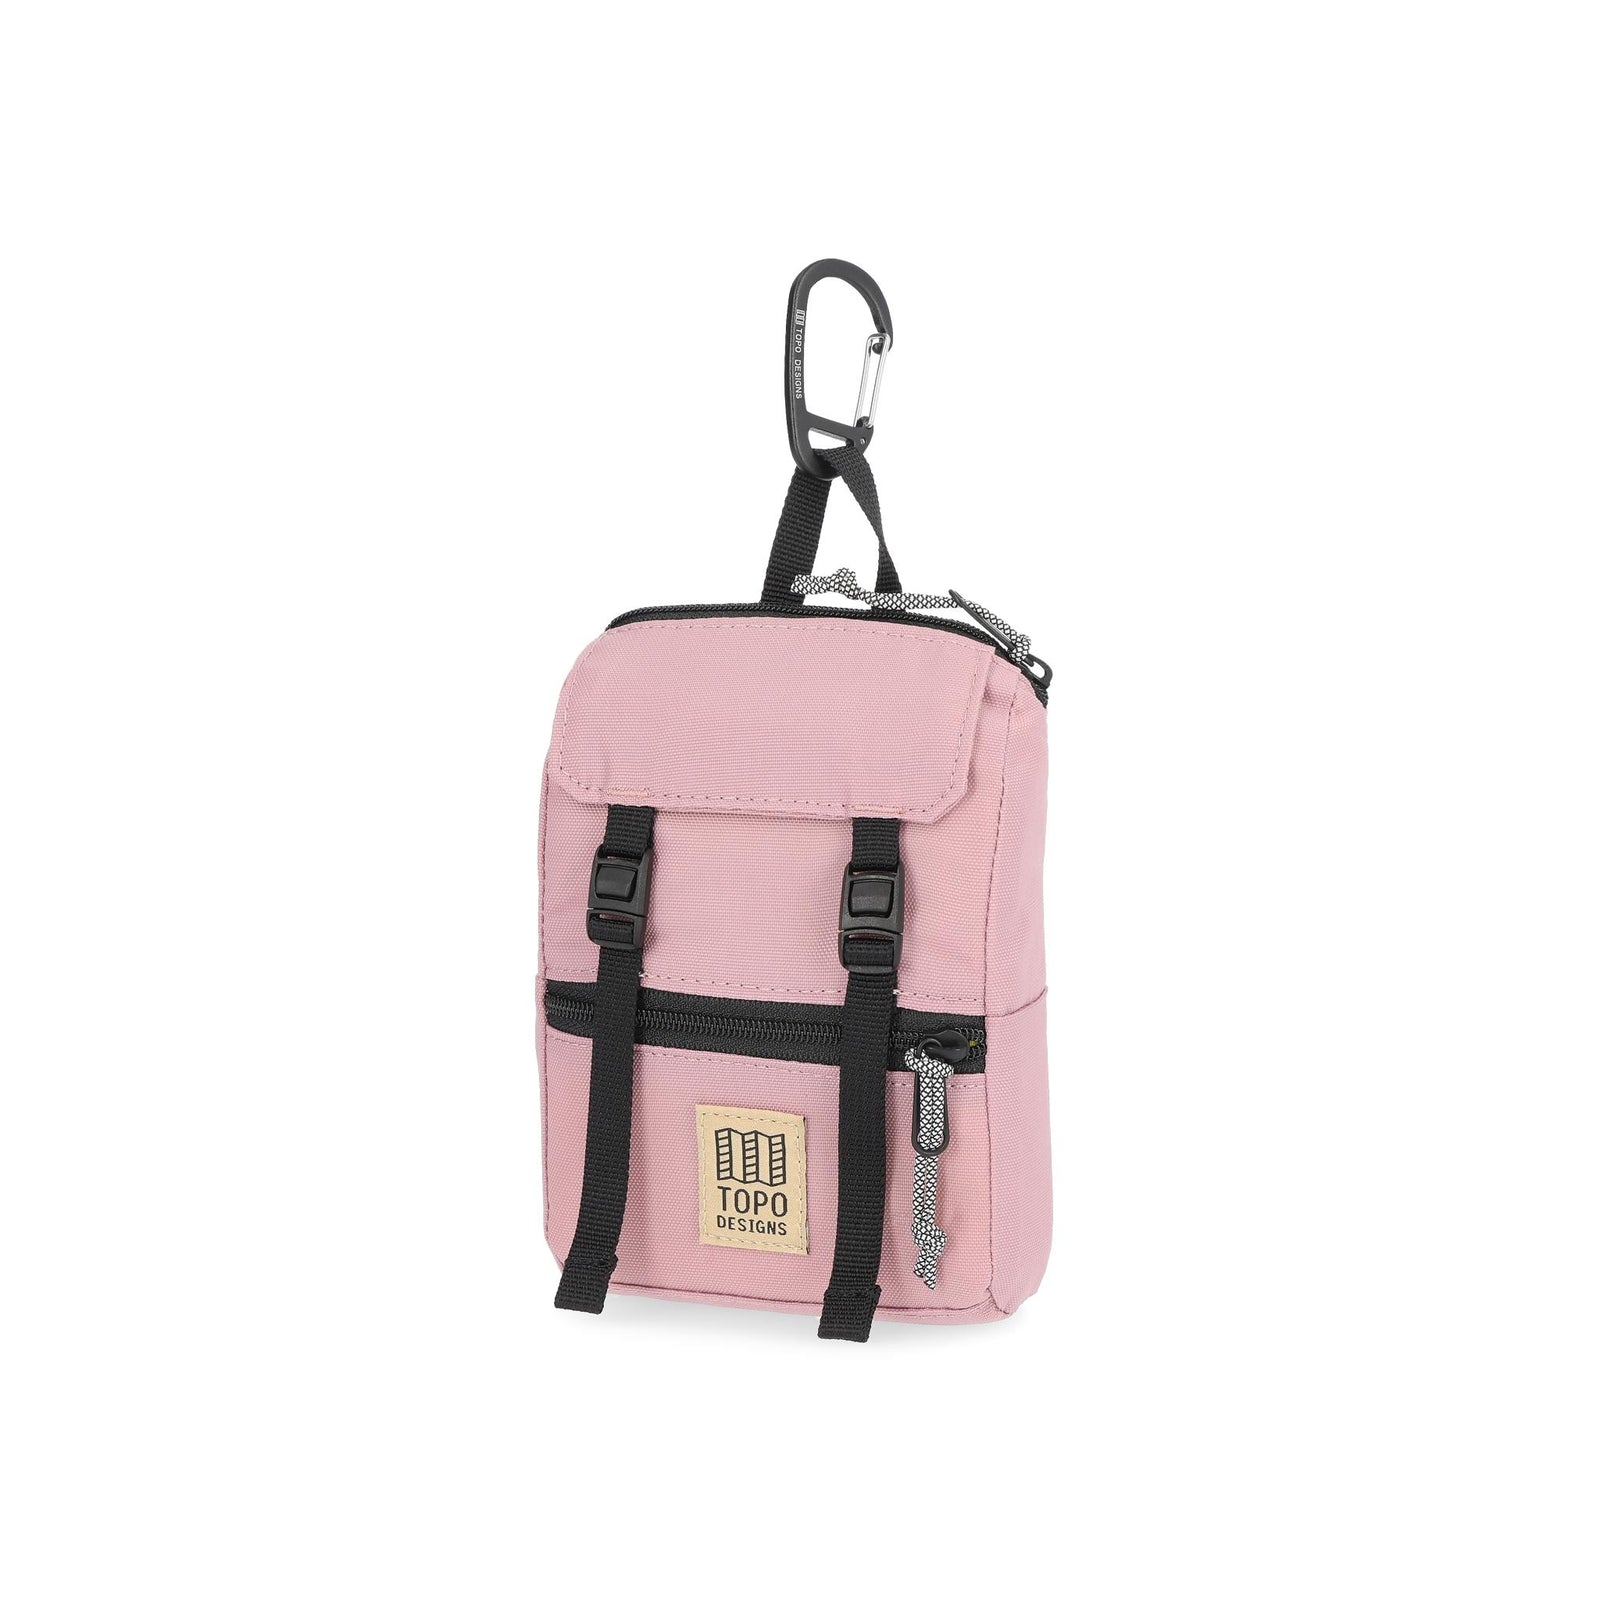 Front View of Topo Designs Rover Pack Micro in "Rose"